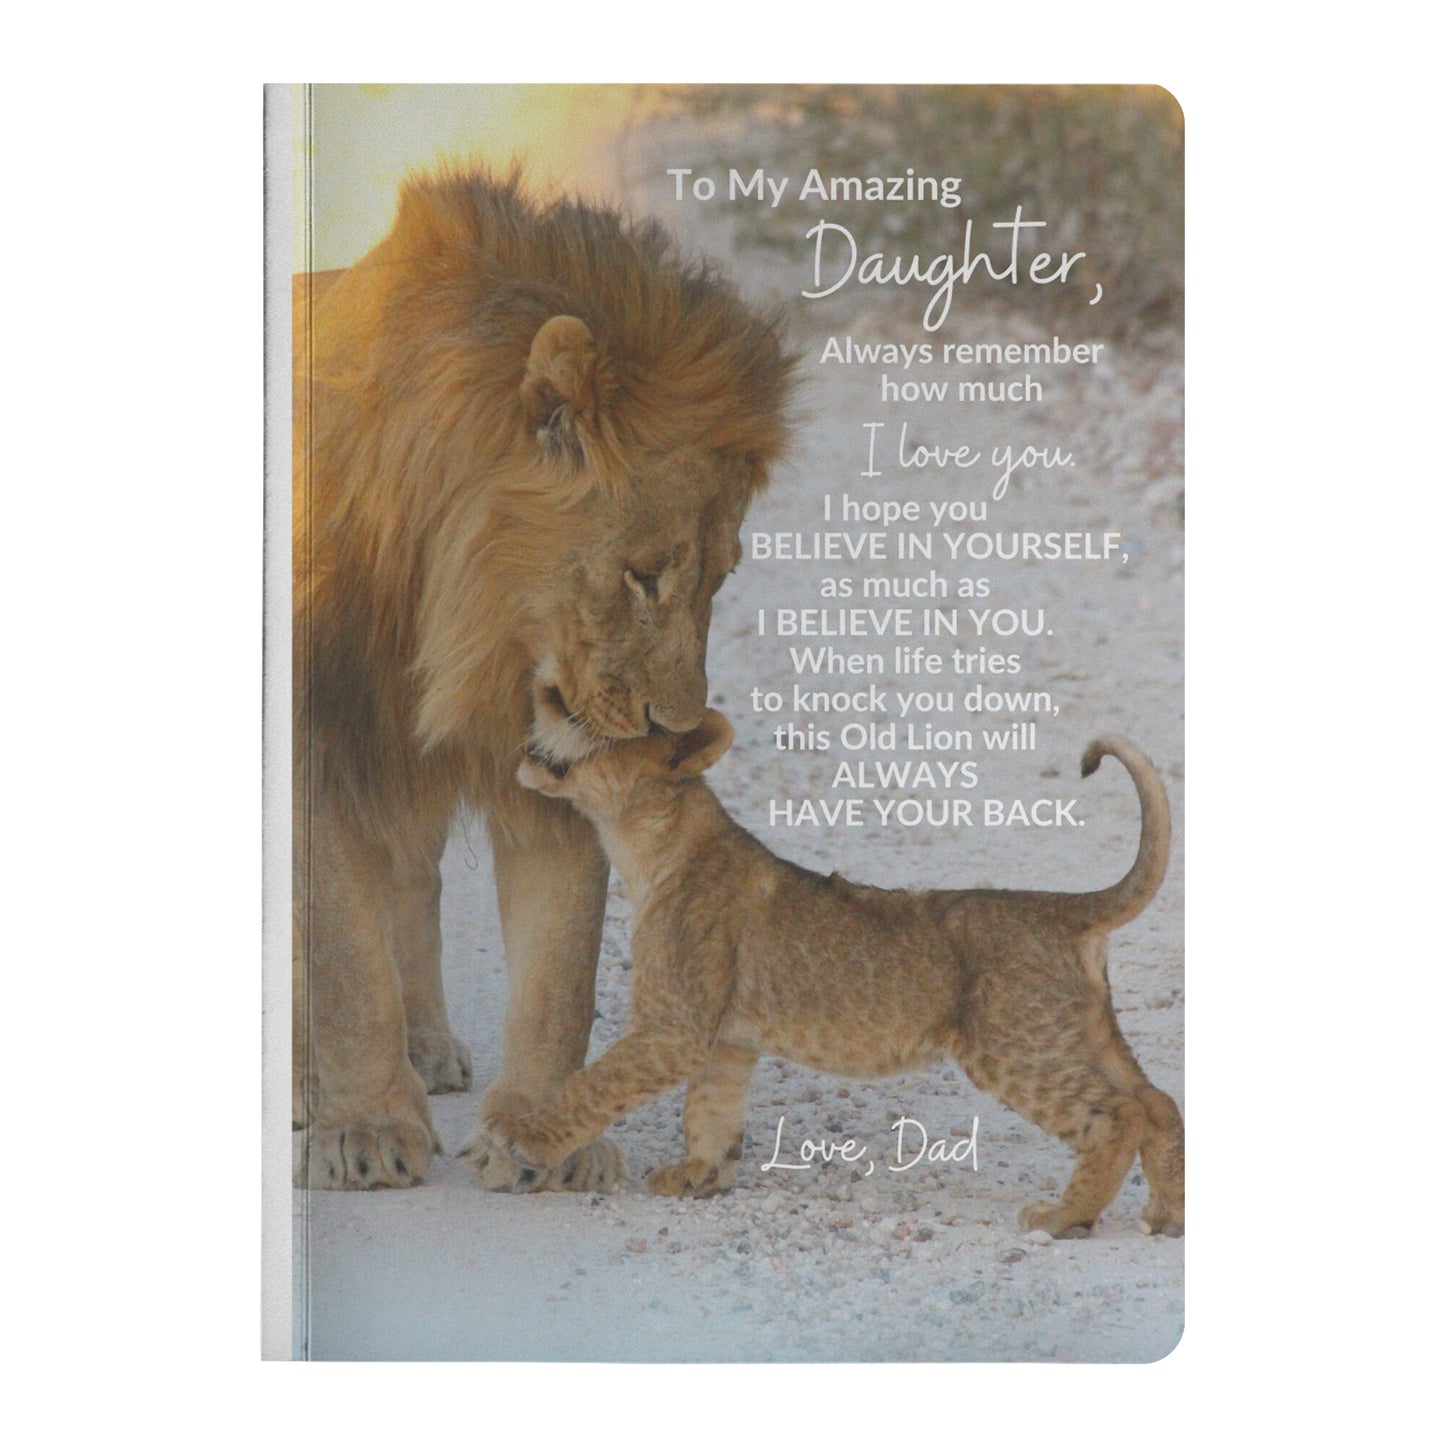 To My Daughter Paperback Journal | Gift from Dad | This Old Lion Will Always Have Your Back